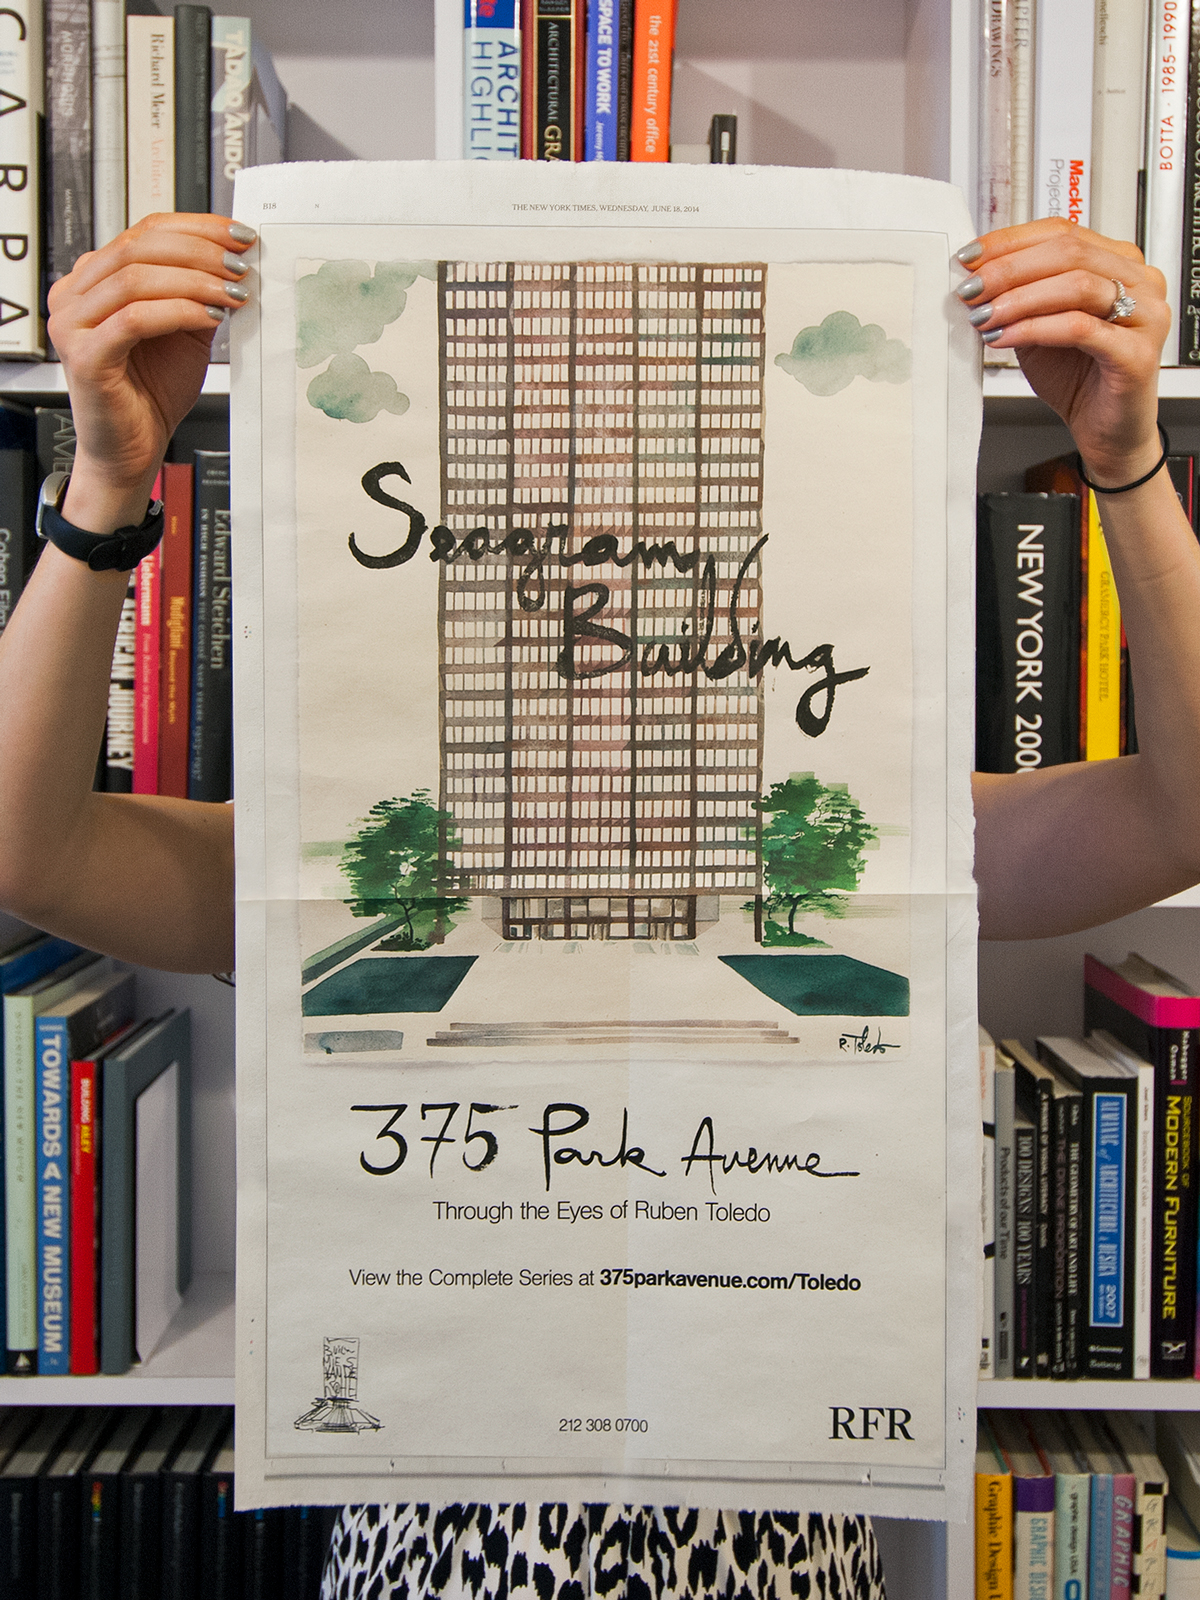 Print collateral for Seagram Building